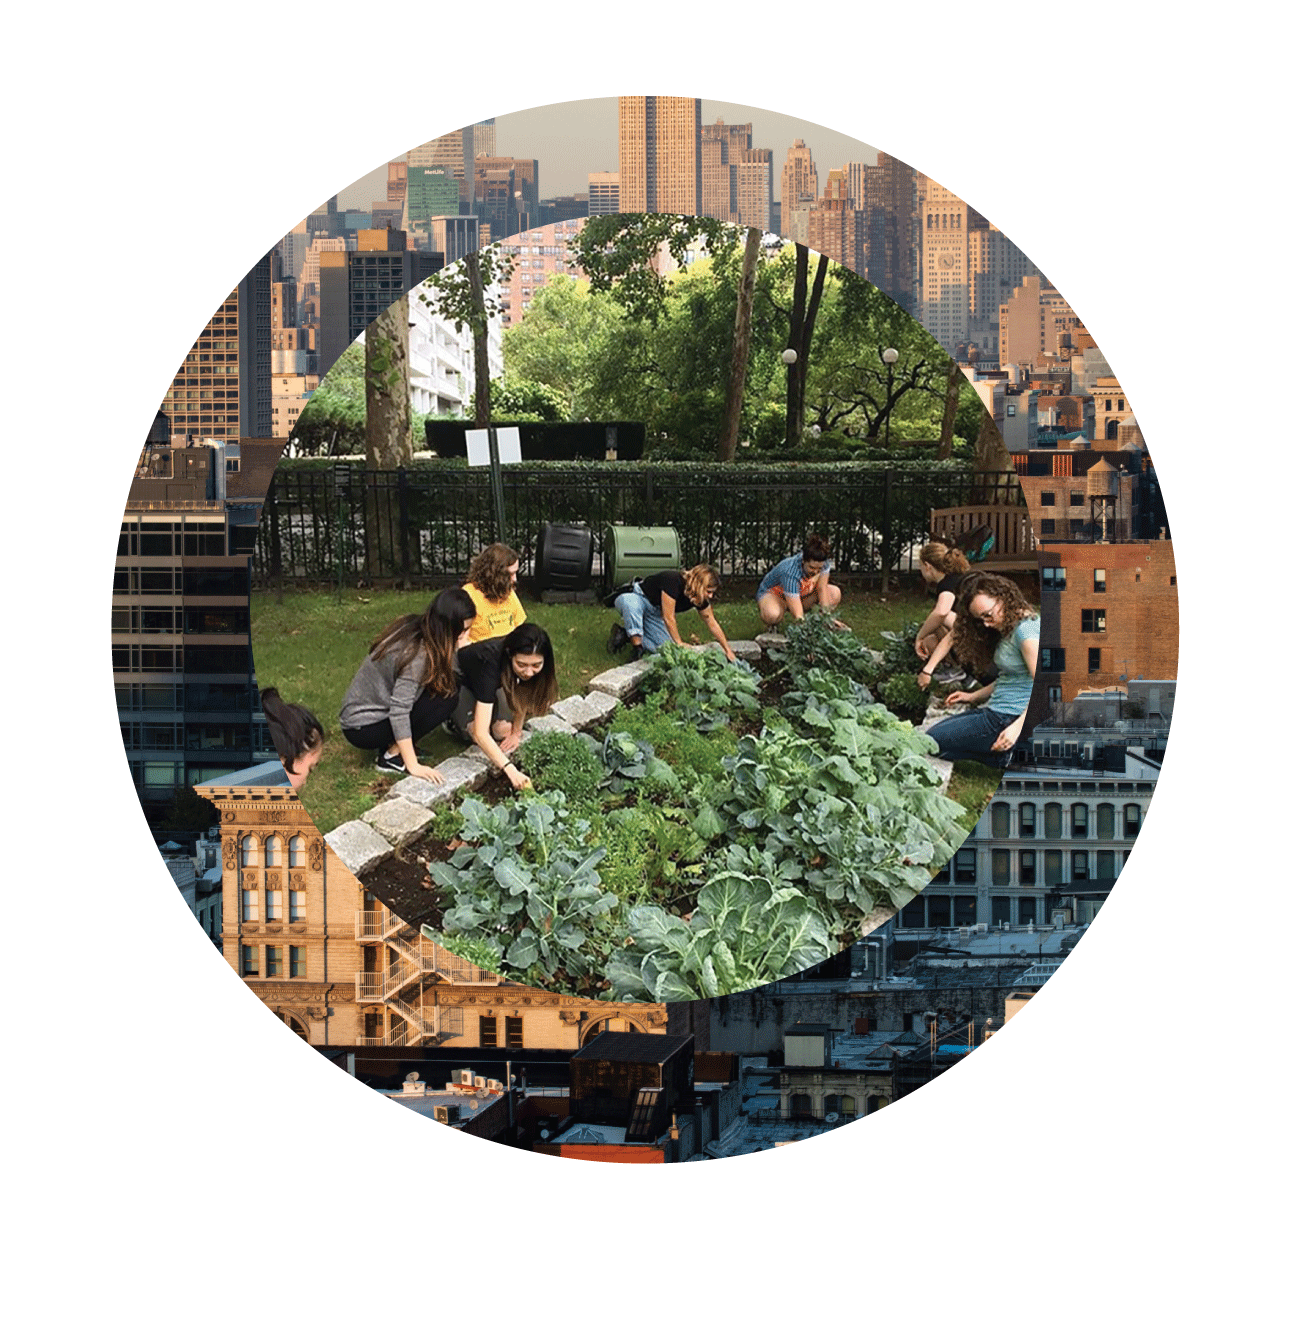 A collage of two images: 1) Students working in a garden 2) A skyline in NYC, multiple buildings are shown